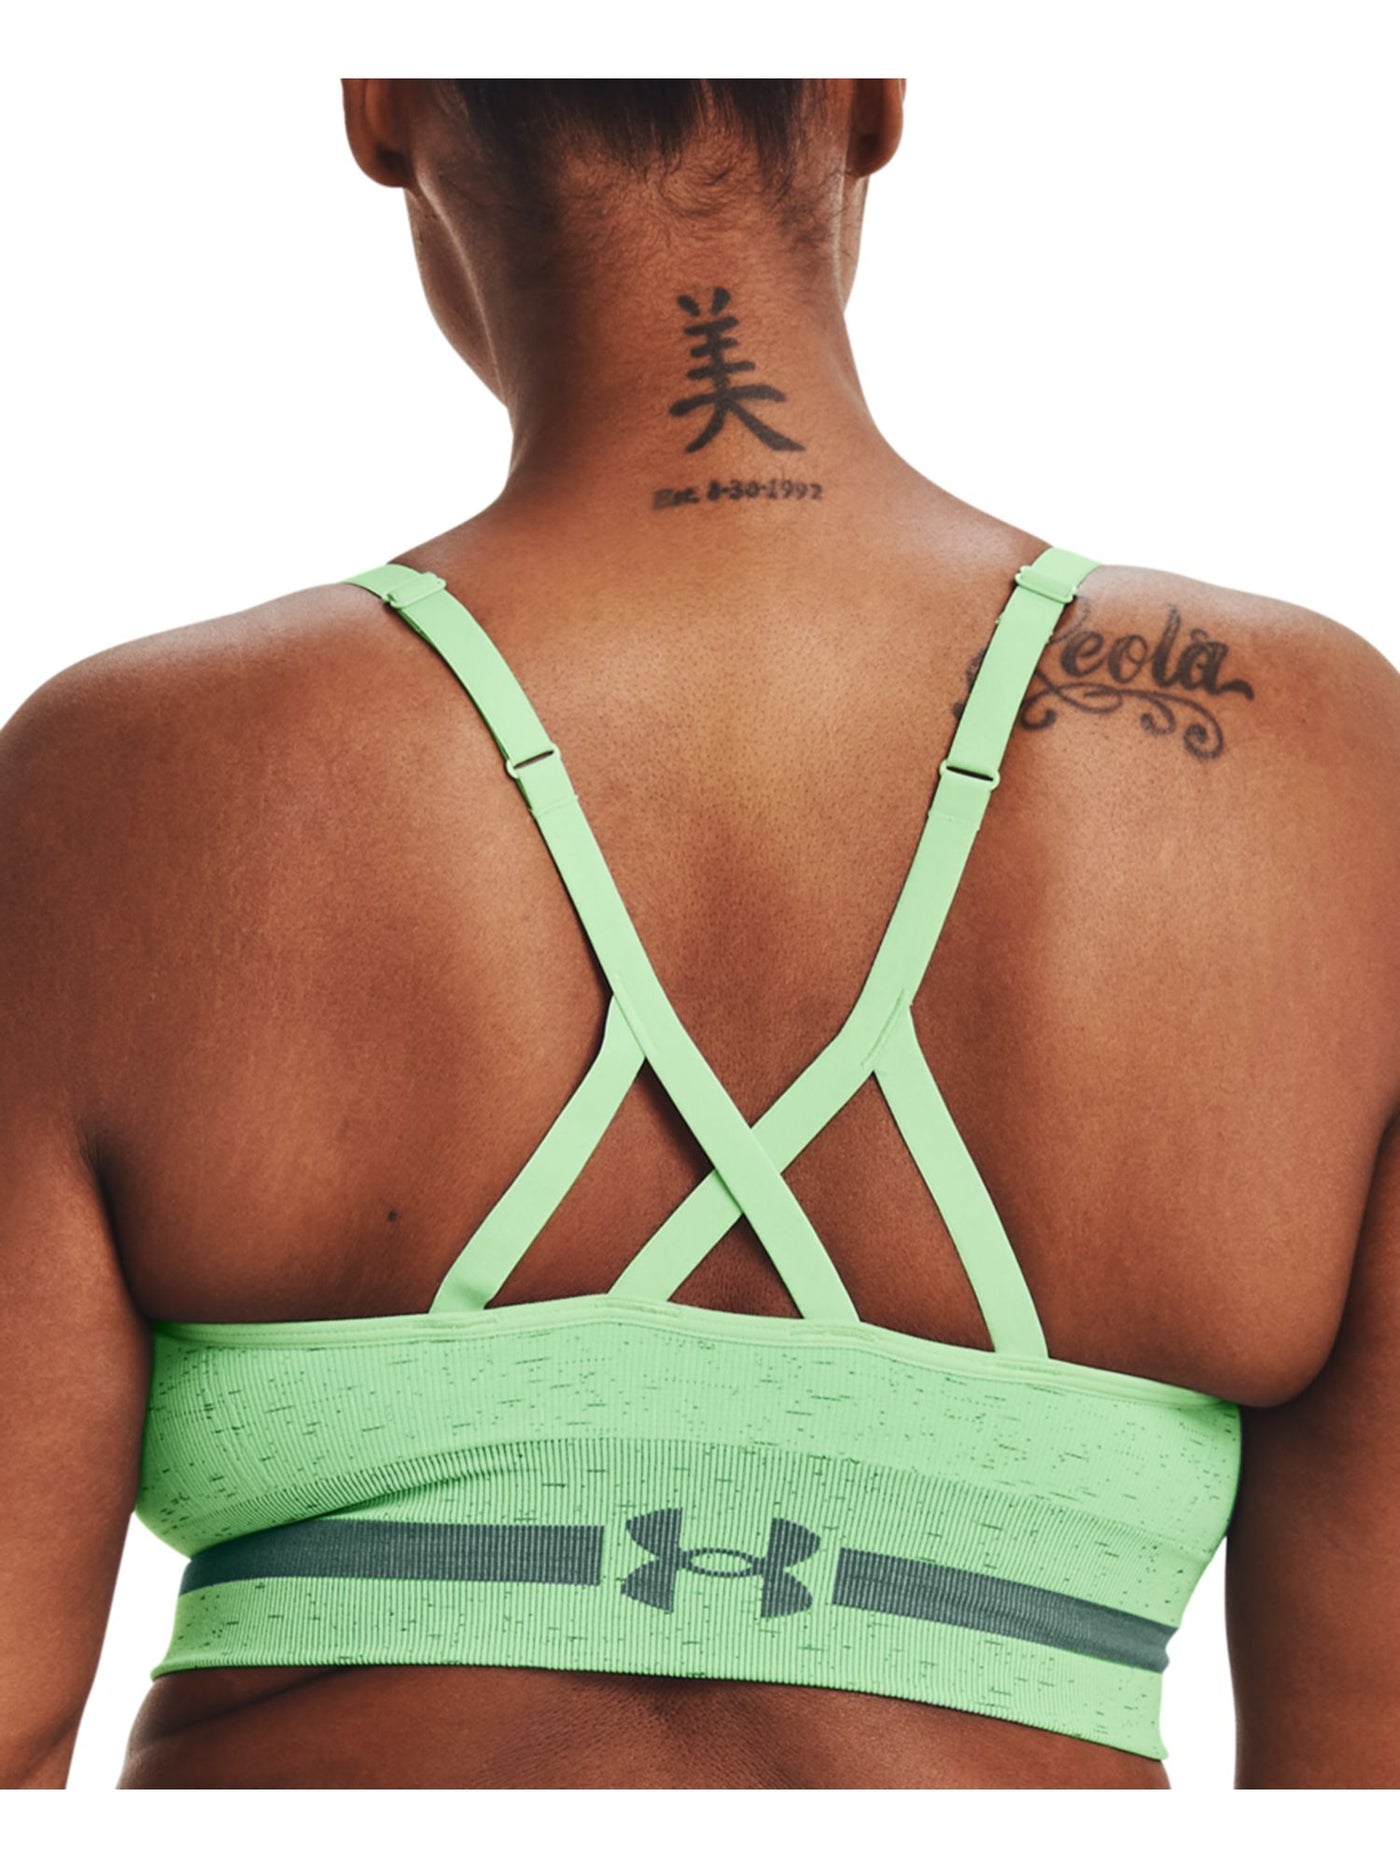 UNDER ARMOUR Intimates Green Ribbed Strappy Light Support Compression Sports Bra XS